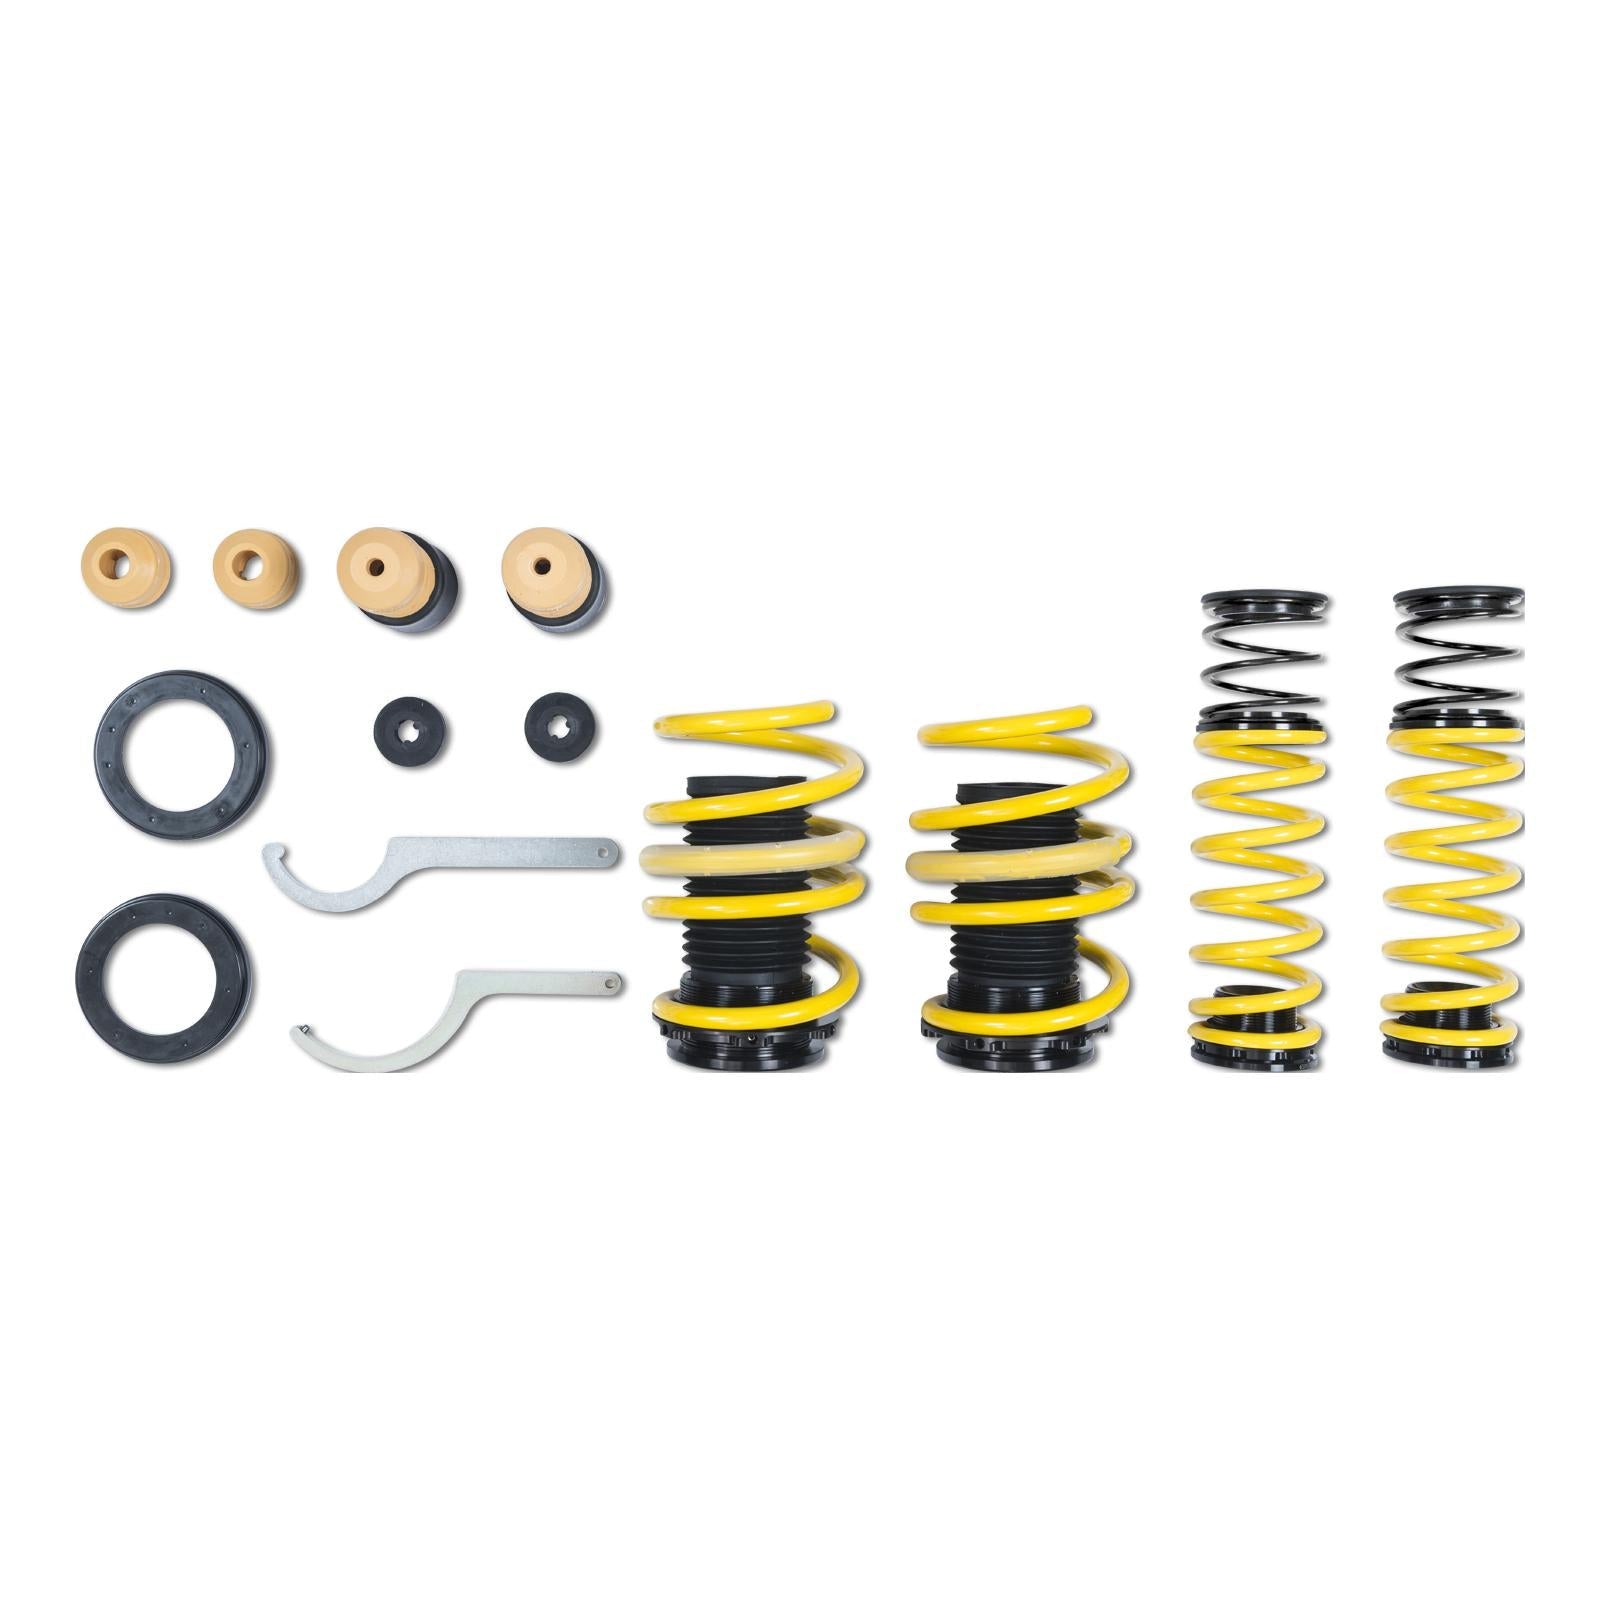 ST Suspensions Adjustable Lowering Springs - Audi 8V S3/RS3 AWD With EDC System